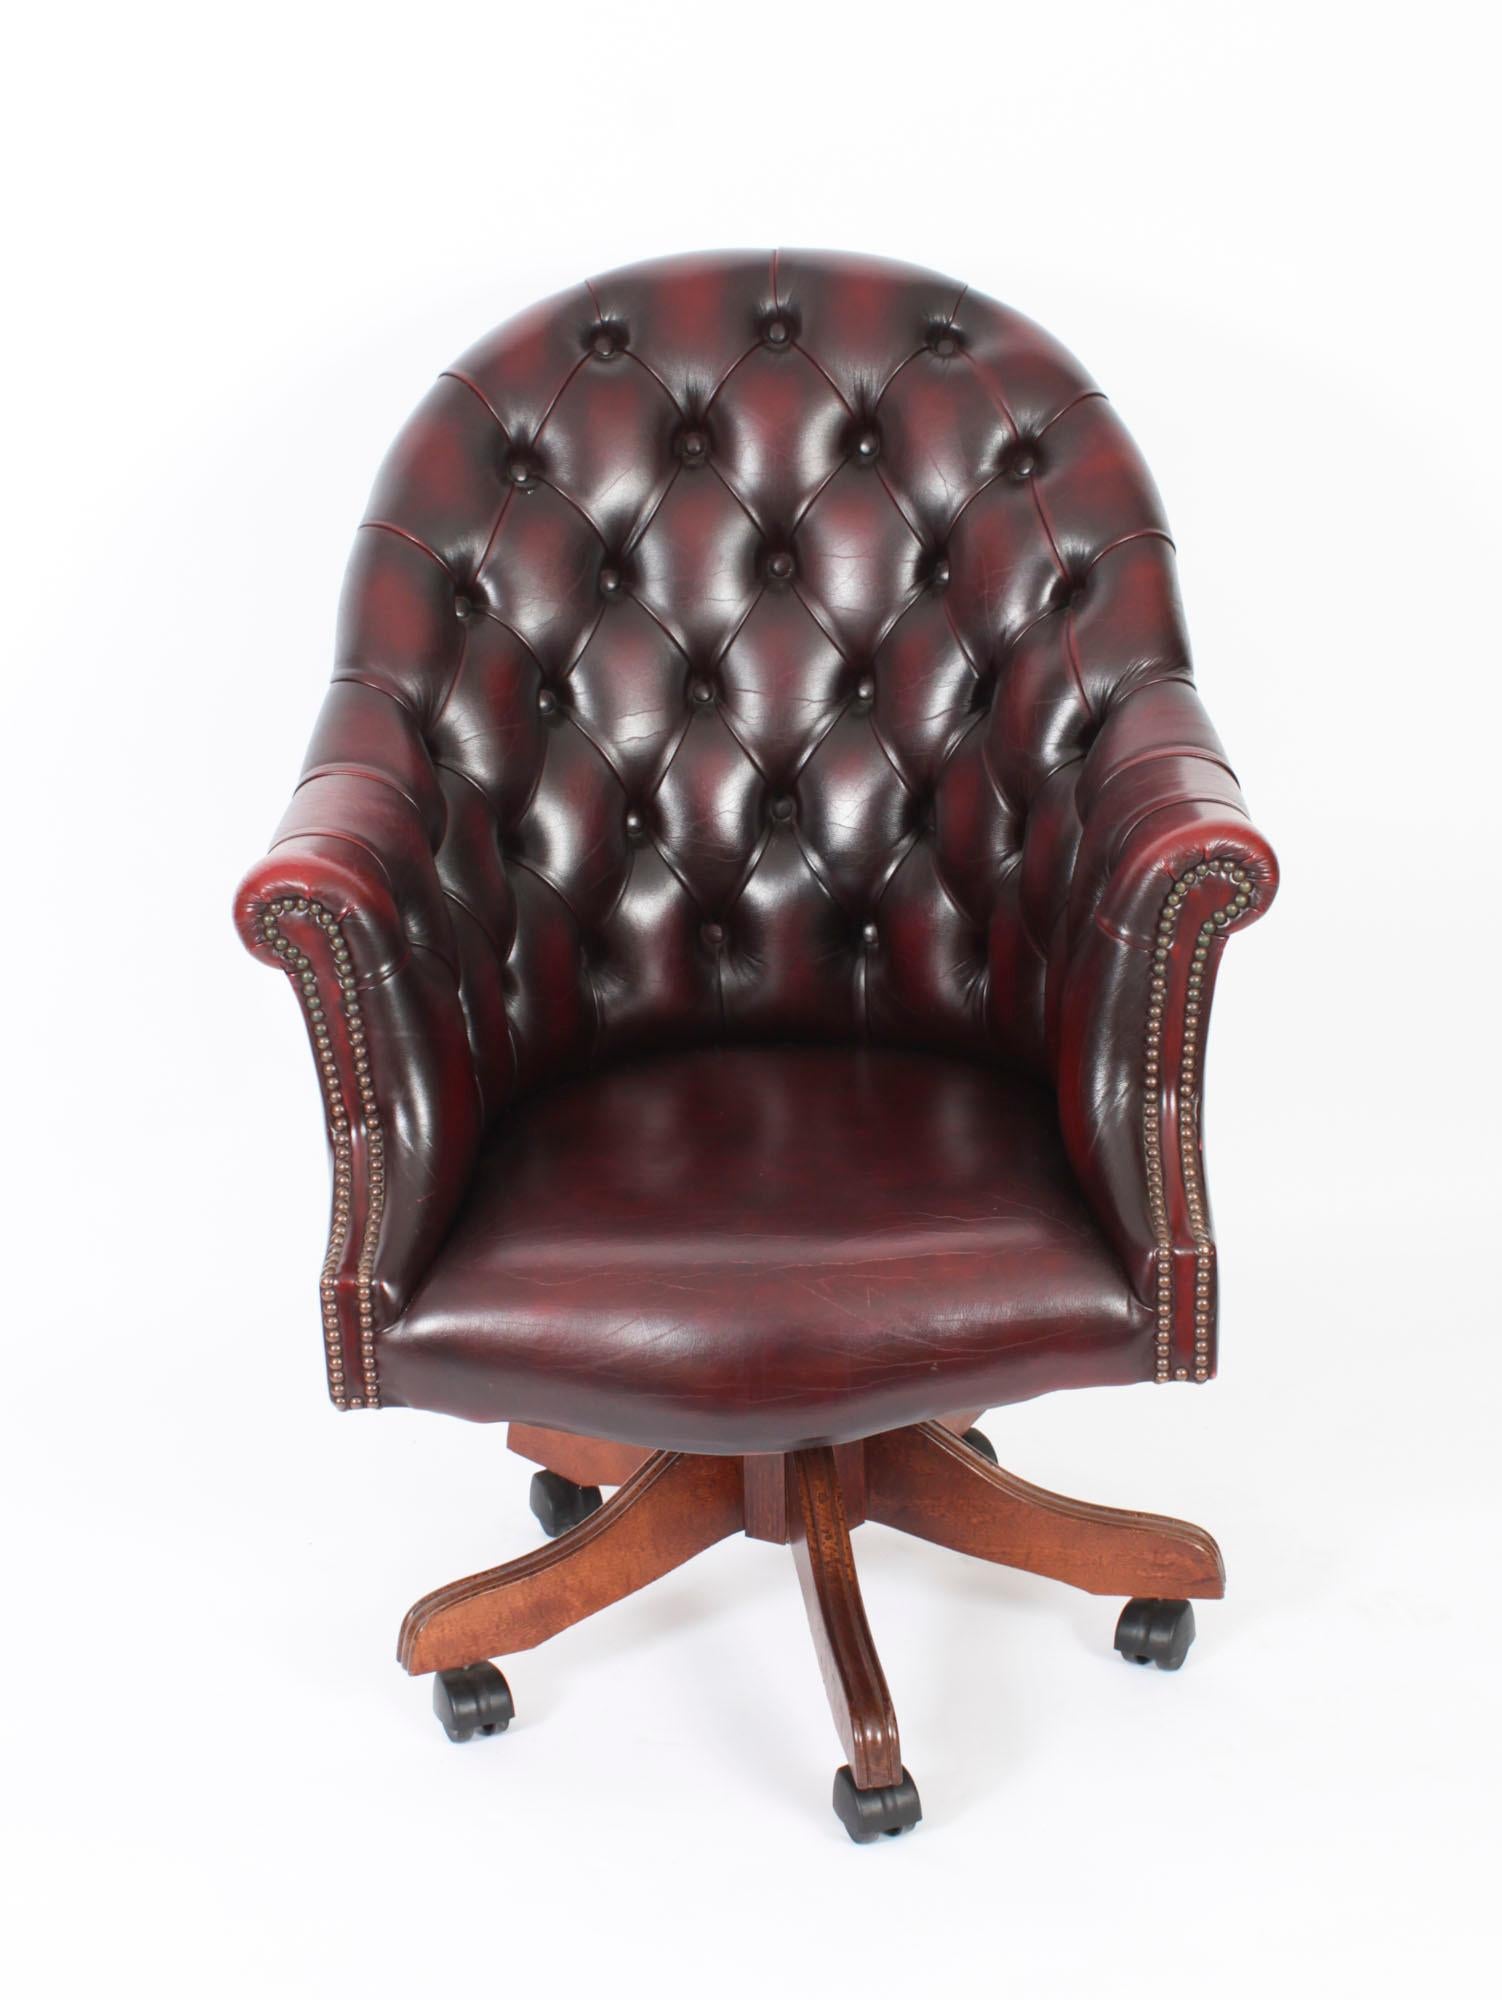 An absolutely stunning vintage leather 'Director's chair' with button back in a beautiful burgundy colour, hand-made in England with materials of the finest quality, dating from the late 20th Century.

Height is adjustable with a swivel/tilt